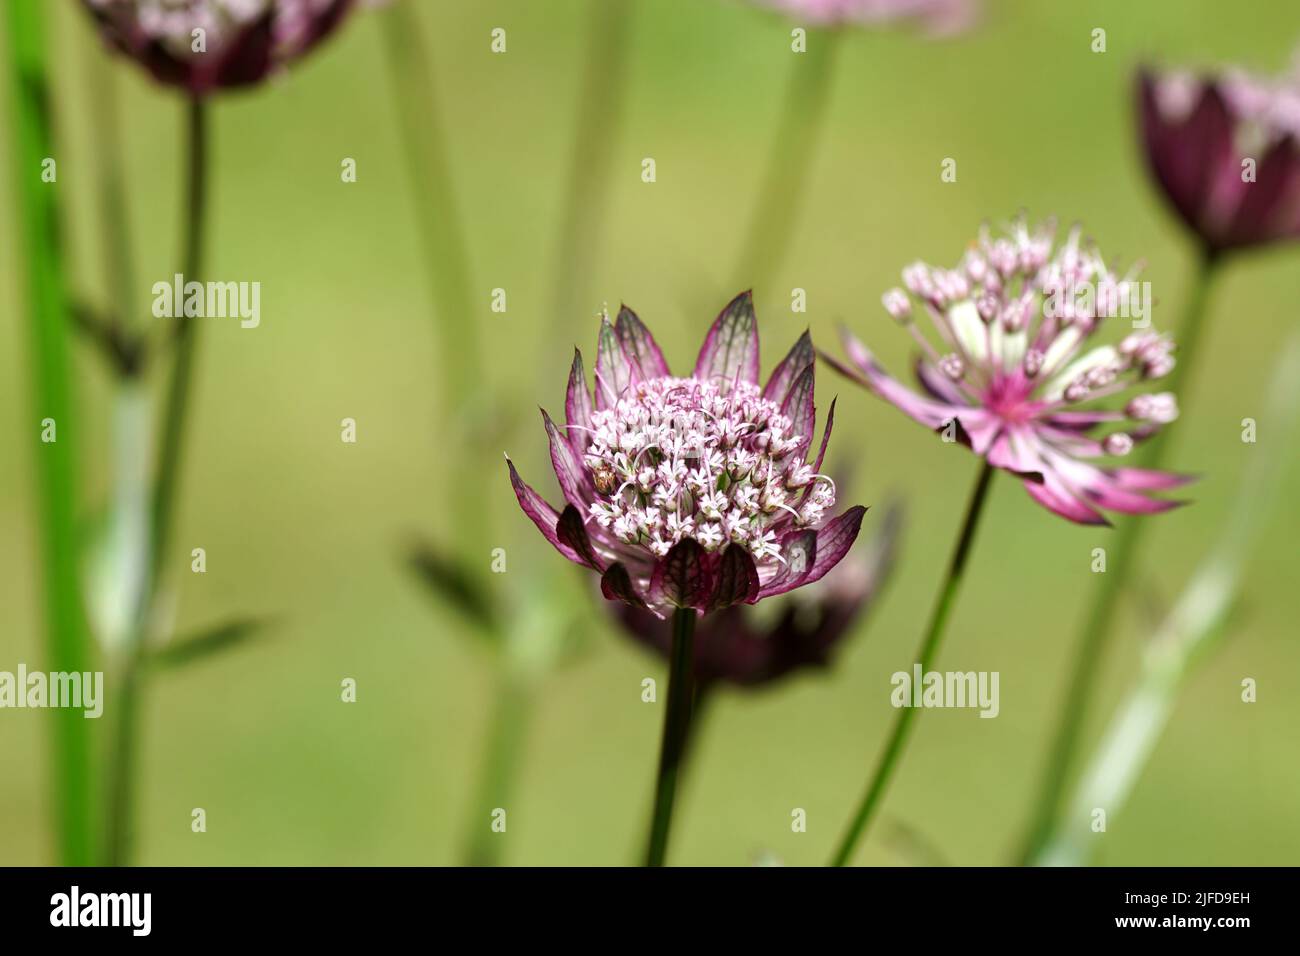 Closeup Flowers of Astrantia major 'Primadonna', the great masterwort, family Apiaceae. July, in a Dutch garden. Blurred lawn on the background. Stock Photo